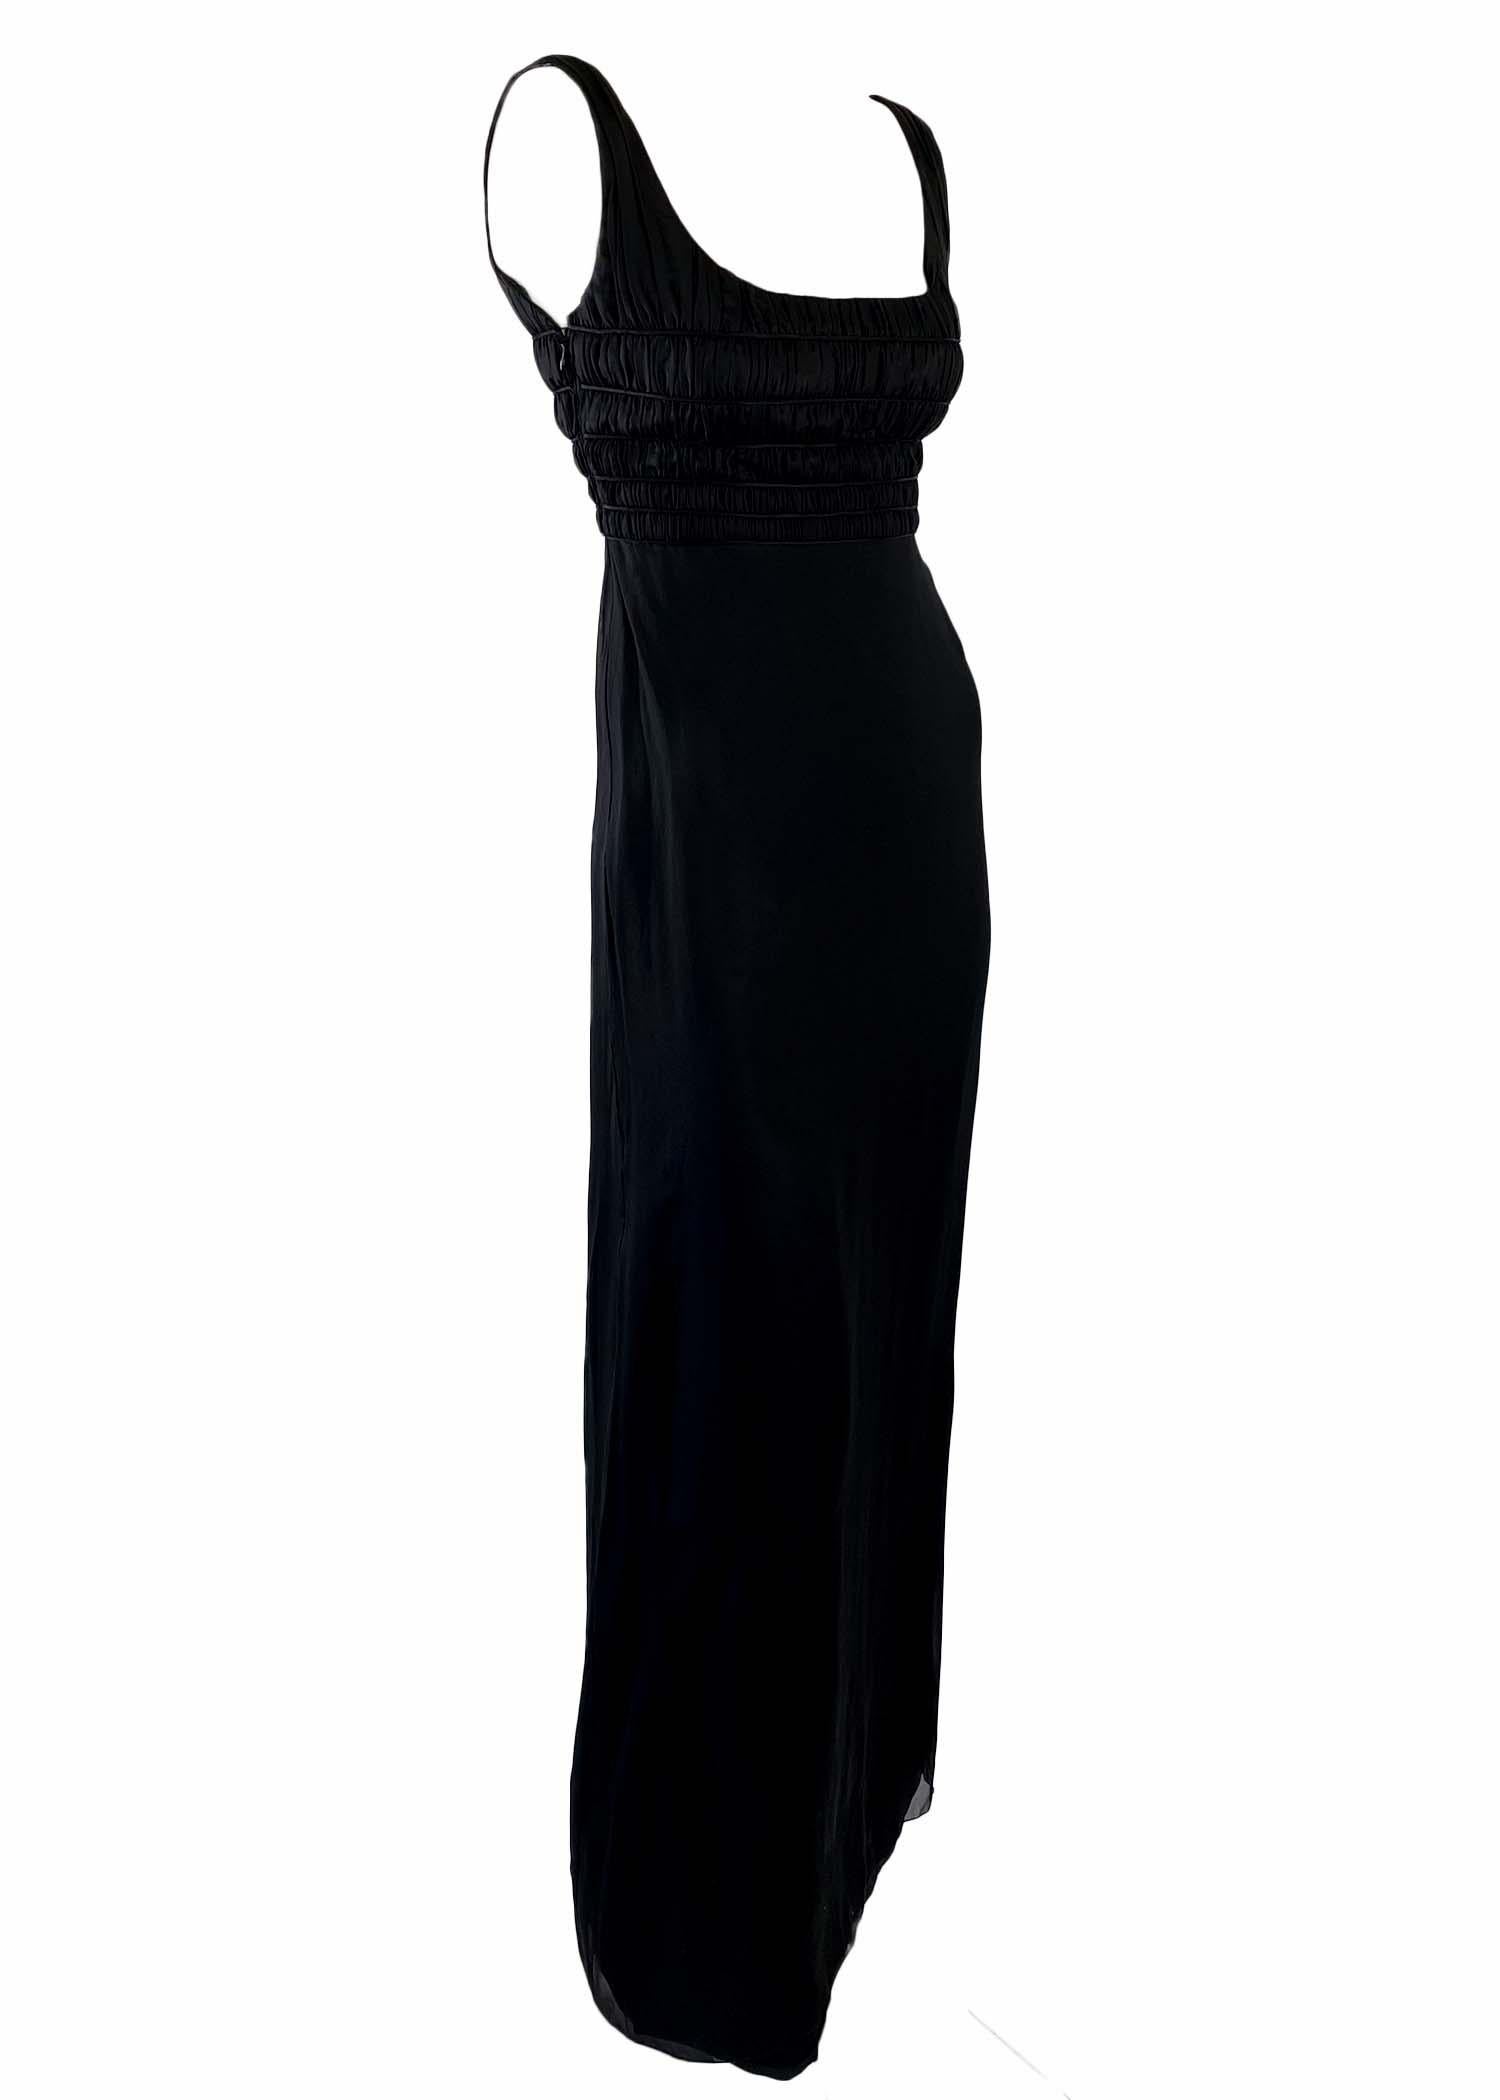 F/W 1998 Gianni Versace by Donatella Black Rhinestone Side Slit Medusa Hook Gown In Good Condition For Sale In West Hollywood, CA